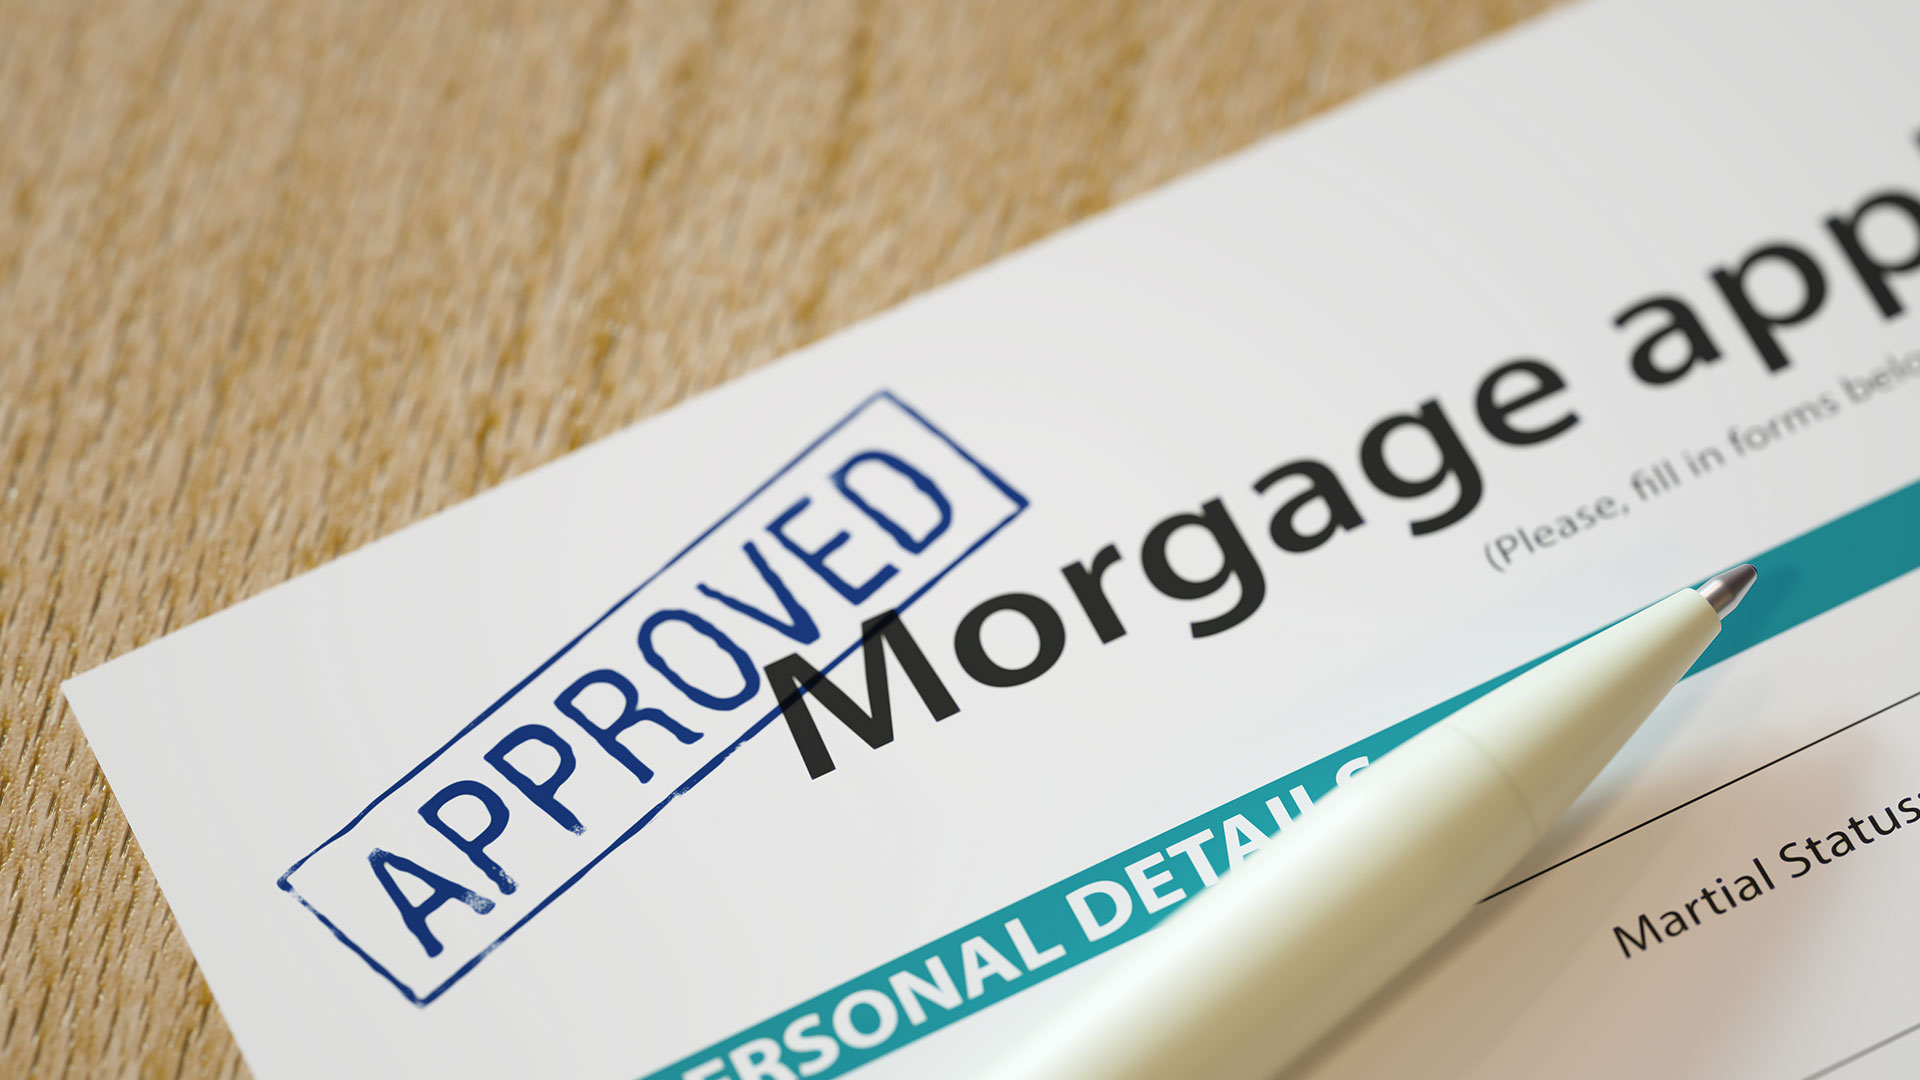 Approved mortgage application